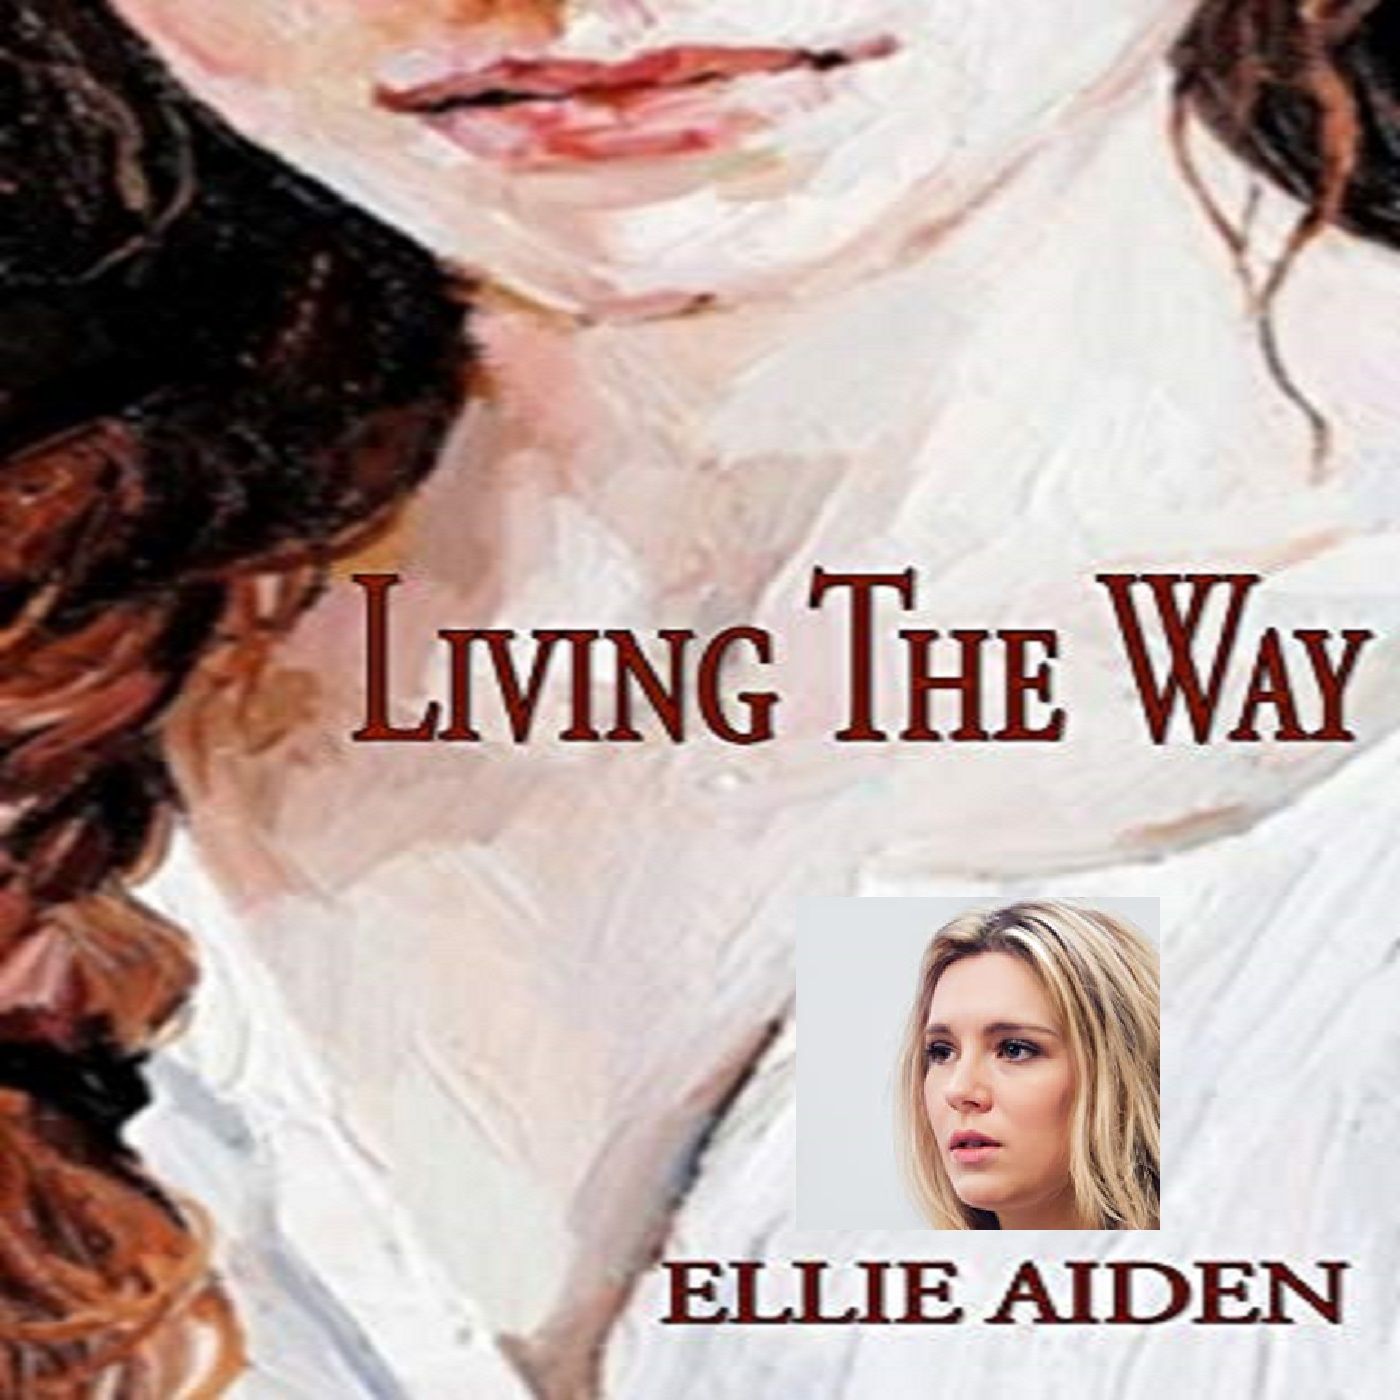 Ellie Aiden Interview author of "Living The Way"